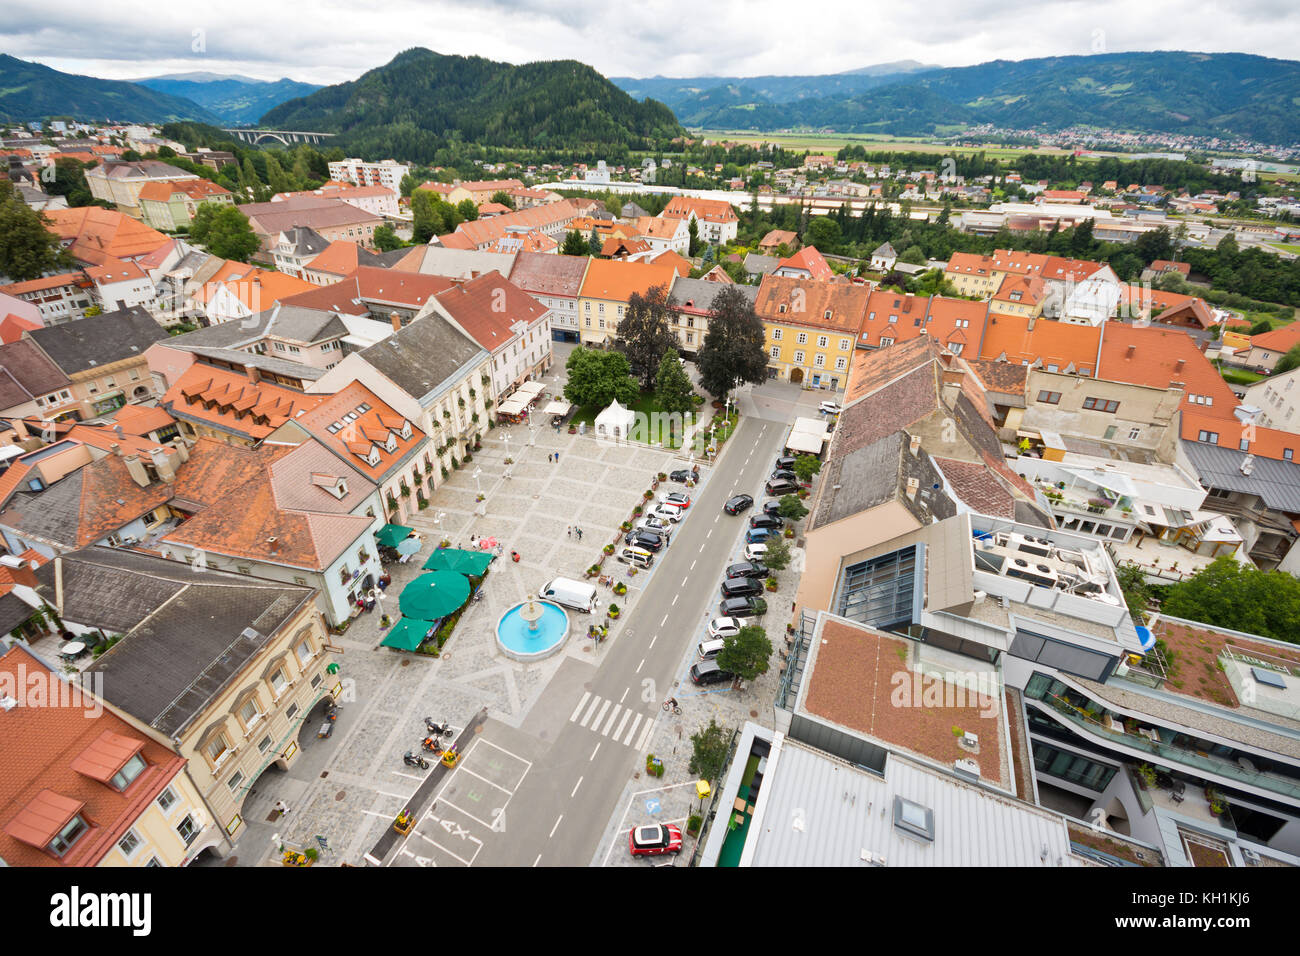 Judenburg, a historic town in Styria, Austria, bird's eye view seen from the city tower. Stock Photo